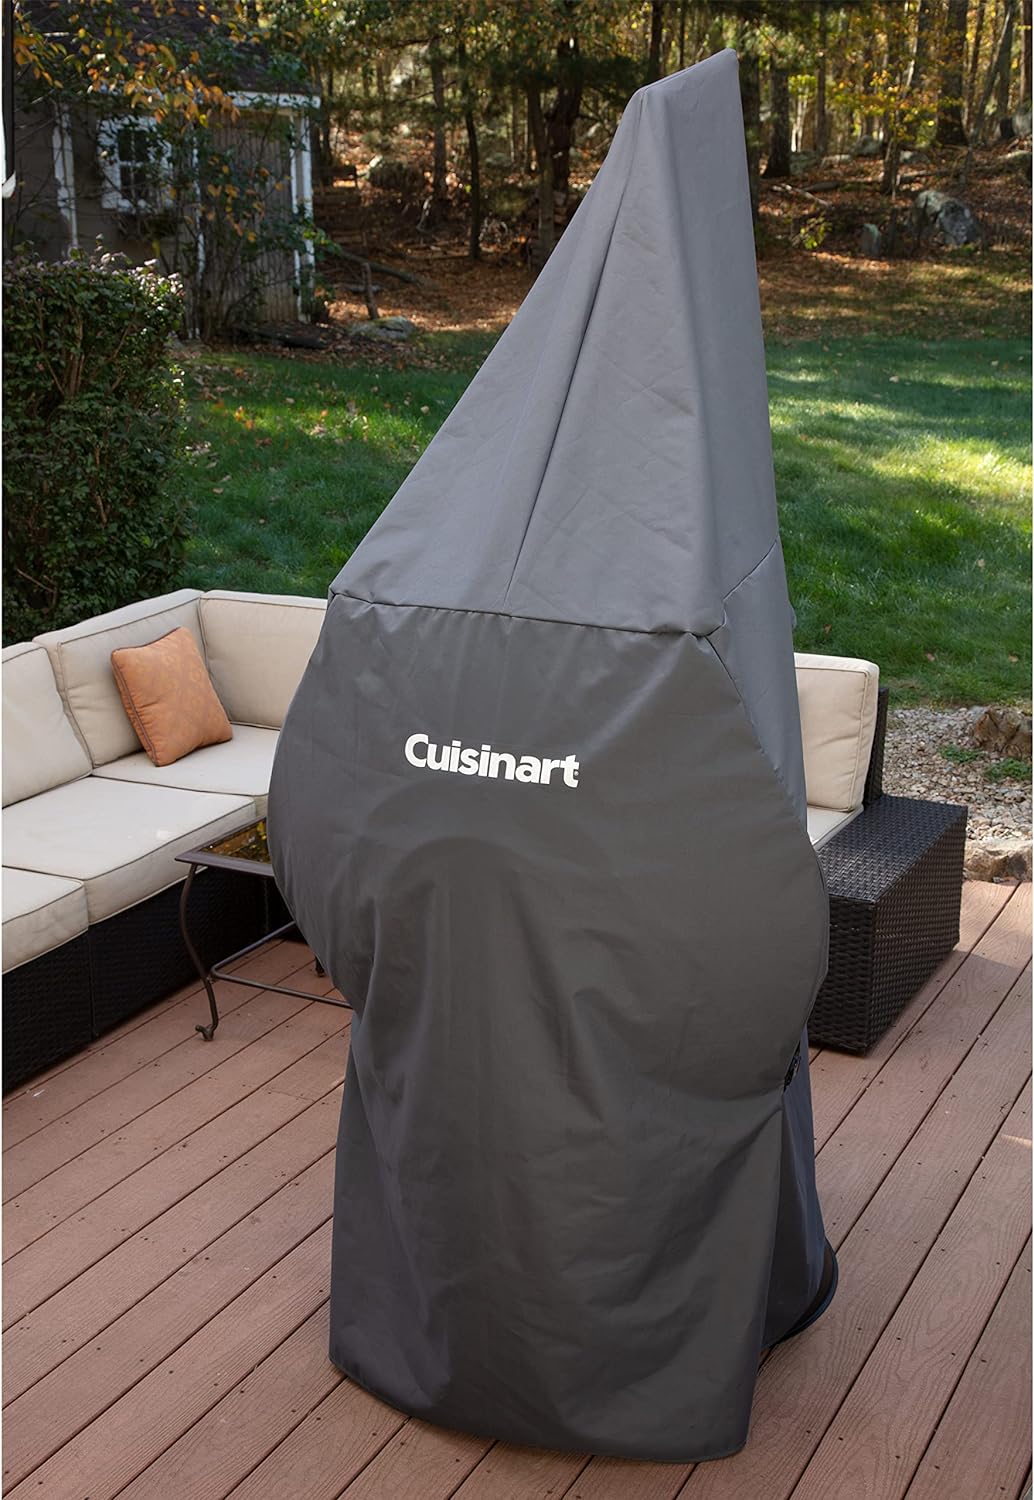 Cuisinart COH-500 Portable Tabletop Patio, 11,000 BTU Outdoor Propane Heater with Safety Tilt Switch and Burner Screen Guard, 30 sq. Foot Heat Range, Black - Cuisinart COH-500 Propane Heater Review